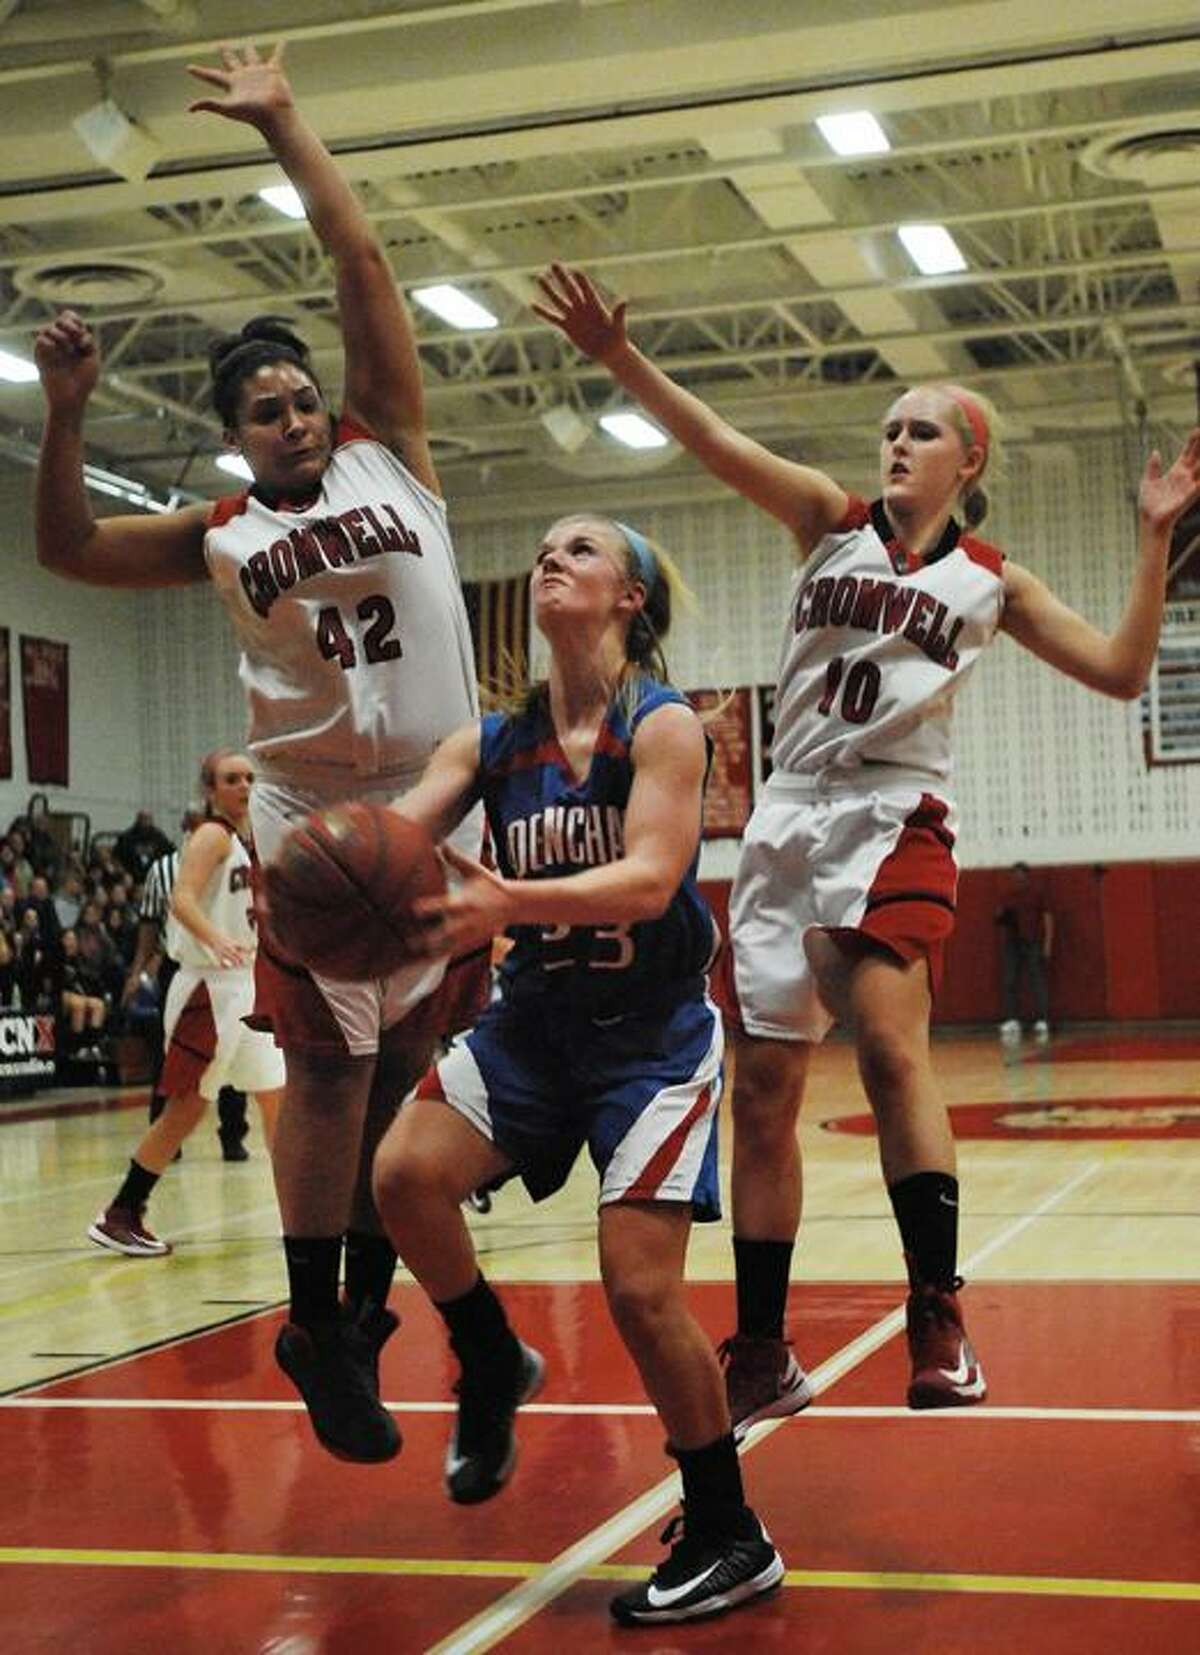 Catherine Avalone/The Middletown Press Cromwell's Mya Villard (42) and Emily Appleby (10) defend Coginchaug's Kim Romanoff as she drives in the paint Friday night in Cromwell. Cromwell defeated Coginchaug 45-30.